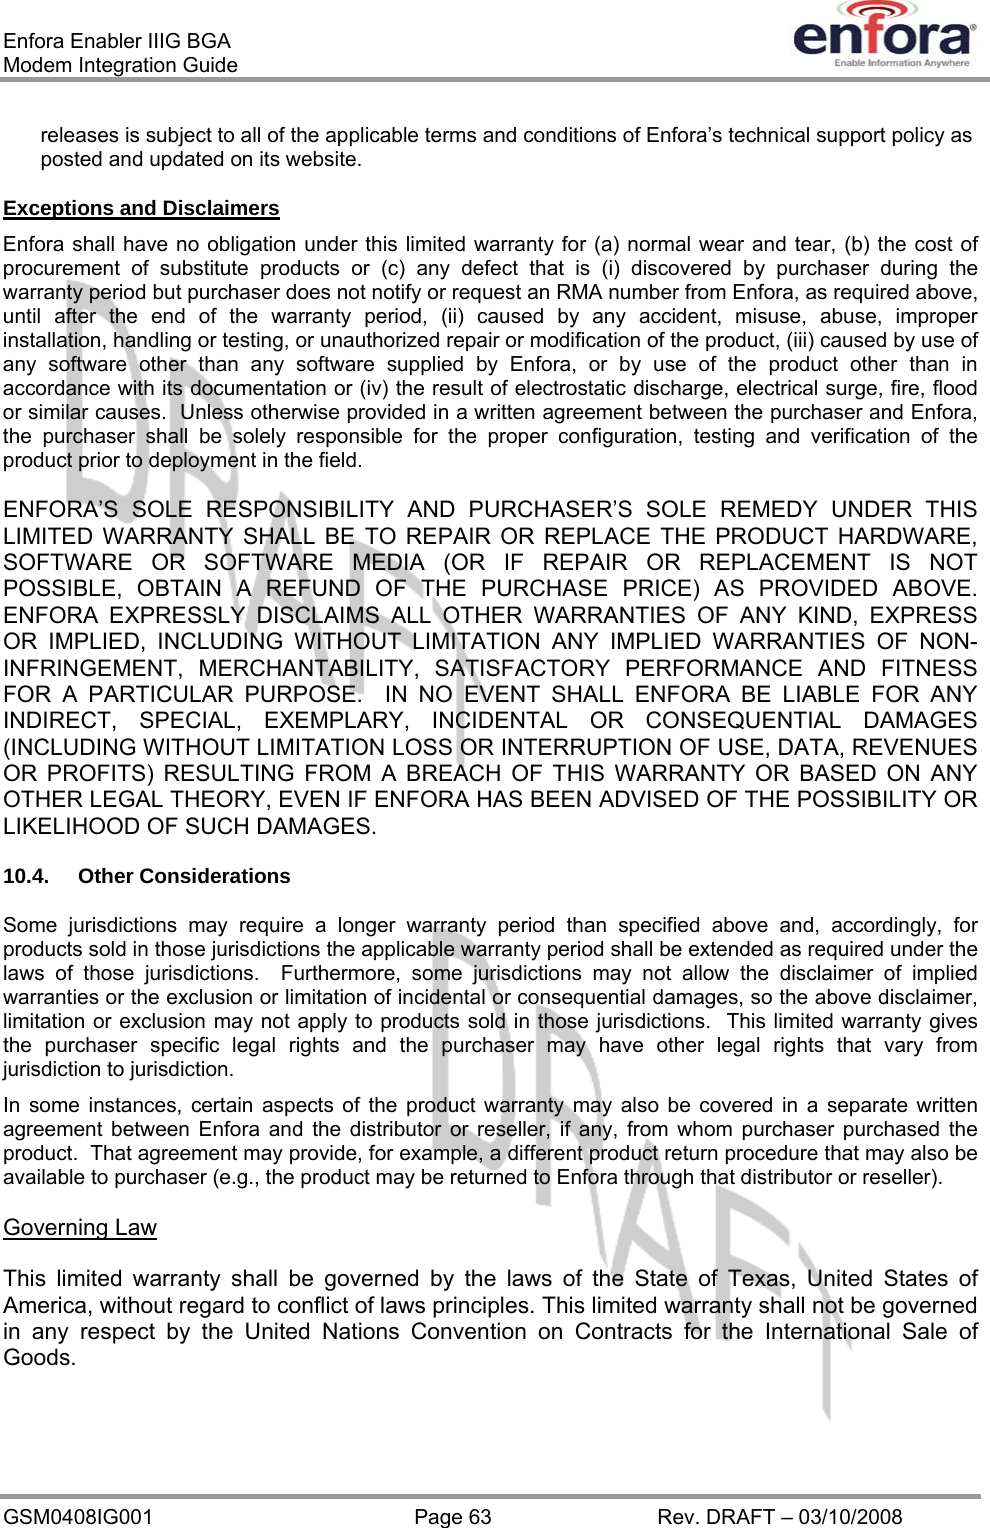 Enfora Enabler IIIG BGA Modem Integration Guide releases is subject to all of the applicable terms and conditions of Enfora’s technical support policy as posted and updated on its website. Exceptions and Disclaimers Enfora shall have no obligation under this limited warranty for (a) normal wear and tear, (b) the cost of procurement of substitute products or (c) any defect that is (i) discovered by purchaser during the warranty period but purchaser does not notify or request an RMA number from Enfora, as required above, until after the end of the warranty period, (ii) caused by any accident, misuse, abuse, improper installation, handling or testing, or unauthorized repair or modification of the product, (iii) caused by use of any software other than any software supplied by Enfora, or by use of the product other than in accordance with its documentation or (iv) the result of electrostatic discharge, electrical surge, fire, flood or similar causes.  Unless otherwise provided in a written agreement between the purchaser and Enfora, the purchaser shall be solely responsible for the proper configuration, testing and verification of the product prior to deployment in the field. ENFORA’S SOLE RESPONSIBILITY AND PURCHASER’S SOLE REMEDY UNDER THIS LIMITED WARRANTY SHALL BE TO REPAIR OR REPLACE THE PRODUCT HARDWARE, SOFTWARE OR SOFTWARE MEDIA (OR IF REPAIR OR REPLACEMENT IS NOT POSSIBLE, OBTAIN A REFUND OF THE PURCHASE PRICE) AS PROVIDED ABOVE.  ENFORA EXPRESSLY DISCLAIMS ALL OTHER WARRANTIES OF ANY KIND, EXPRESS OR IMPLIED, INCLUDING WITHOUT LIMITATION ANY IMPLIED WARRANTIES OF NON-INFRINGEMENT, MERCHANTABILITY, SATISFACTORY PERFORMANCE AND FITNESS FOR A PARTICULAR PURPOSE.  IN NO EVENT SHALL ENFORA BE LIABLE FOR ANY INDIRECT, SPECIAL, EXEMPLARY, INCIDENTAL OR CONSEQUENTIAL DAMAGES (INCLUDING WITHOUT LIMITATION LOSS OR INTERRUPTION OF USE, DATA, REVENUES OR PROFITS) RESULTING FROM A BREACH OF THIS WARRANTY OR BASED ON ANY OTHER LEGAL THEORY, EVEN IF ENFORA HAS BEEN ADVISED OF THE POSSIBILITY OR LIKELIHOOD OF SUCH DAMAGES. 10.4. Other Considerations Some jurisdictions may require a longer warranty period than specified above and, accordingly, for products sold in those jurisdictions the applicable warranty period shall be extended as required under the laws of those jurisdictions.  Furthermore, some jurisdictions may not allow the disclaimer of implied warranties or the exclusion or limitation of incidental or consequential damages, so the above disclaimer, limitation or exclusion may not apply to products sold in those jurisdictions.  This limited warranty gives the purchaser specific legal rights and the purchaser may have other legal rights that vary from jurisdiction to jurisdiction. In some instances, certain aspects of the product warranty may also be covered in a separate written agreement between Enfora and the distributor or reseller, if any, from whom purchaser purchased the product.  That agreement may provide, for example, a different product return procedure that may also be available to purchaser (e.g., the product may be returned to Enfora through that distributor or reseller). Governing Law This limited warranty shall be governed by the laws of the State of Texas, United States of America, without regard to conflict of laws principles. This limited warranty shall not be governed in any respect by the United Nations Convention on Contracts for the International Sale of Goods. GSM0408IG001  Page 63  Rev. DRAFT – 03/10/2008 